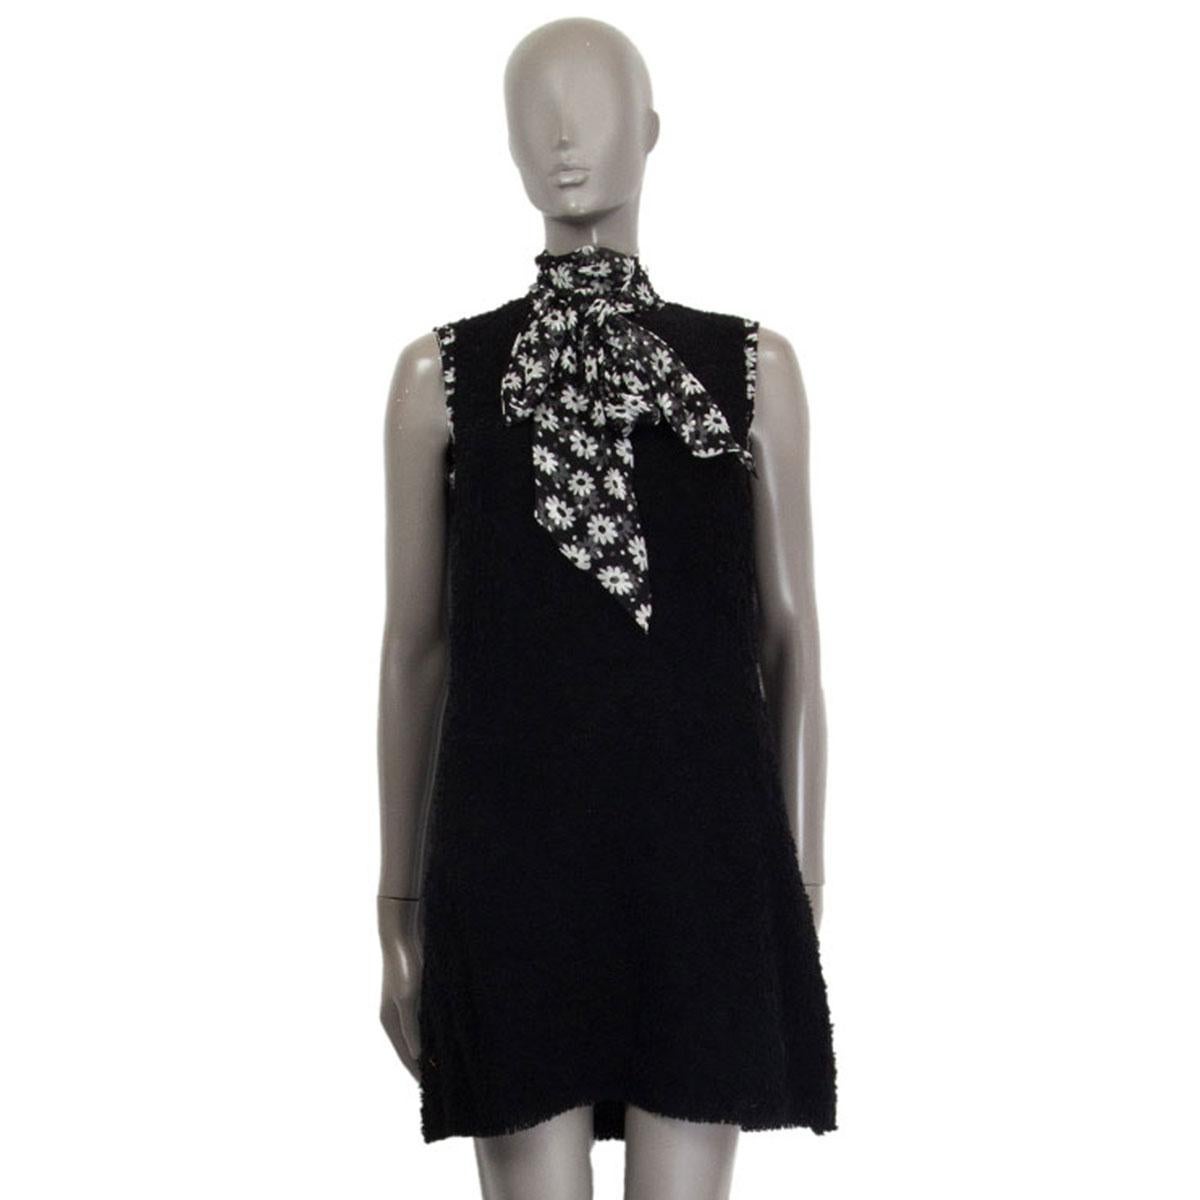 authentic Dolce & Gabbana bouclé dress in black wool (66%) silk (20%) and polyamide (14%) with a black&white floral print silk (100%) scarf to bind around the neck and at the armhole hem. Closes with a zipper on the back. Lined in black polyester